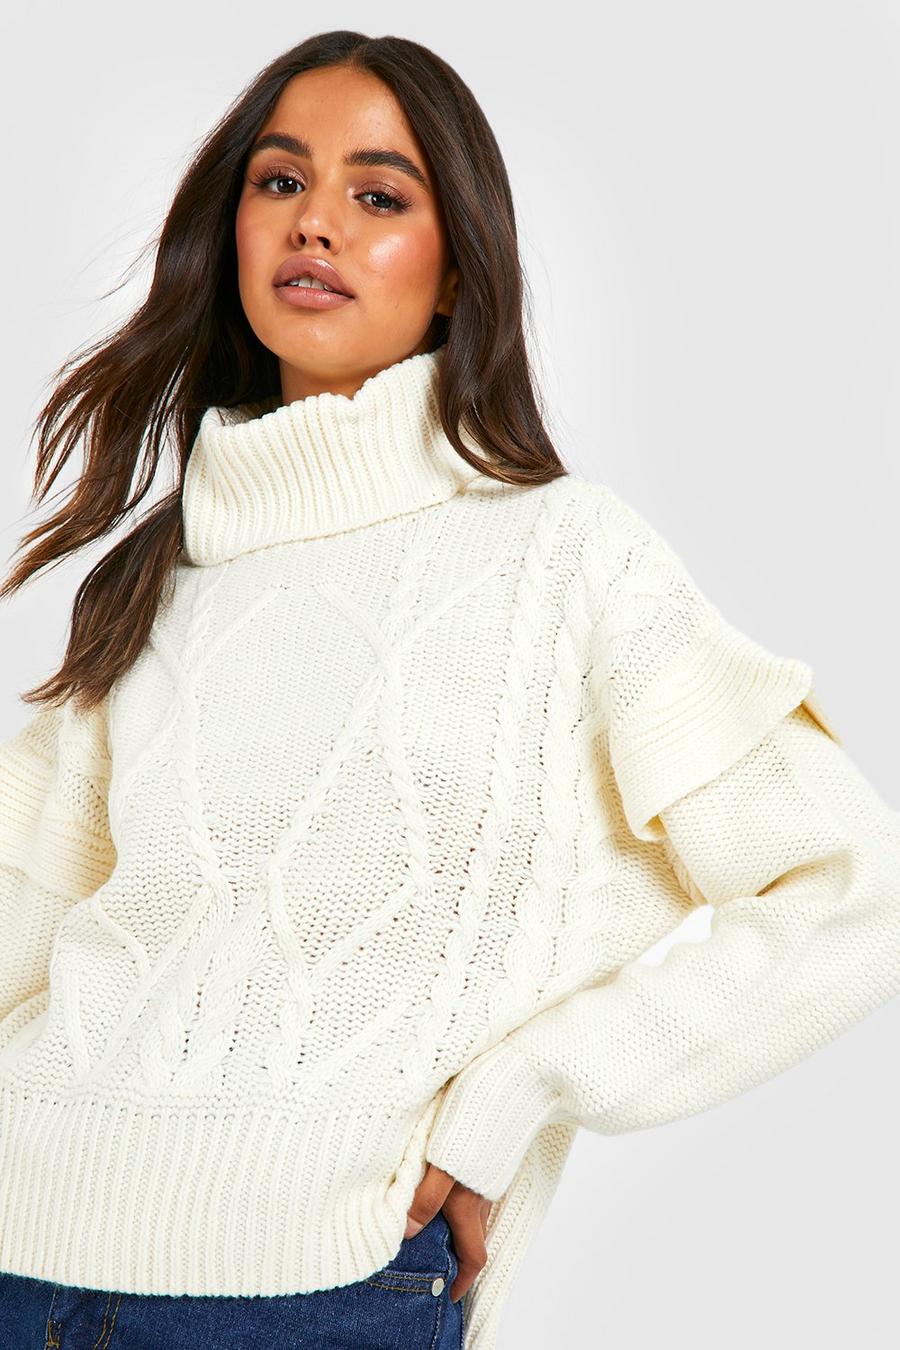 Ivory white Cable Knit Shoulder Detail Turtleneck Sweater